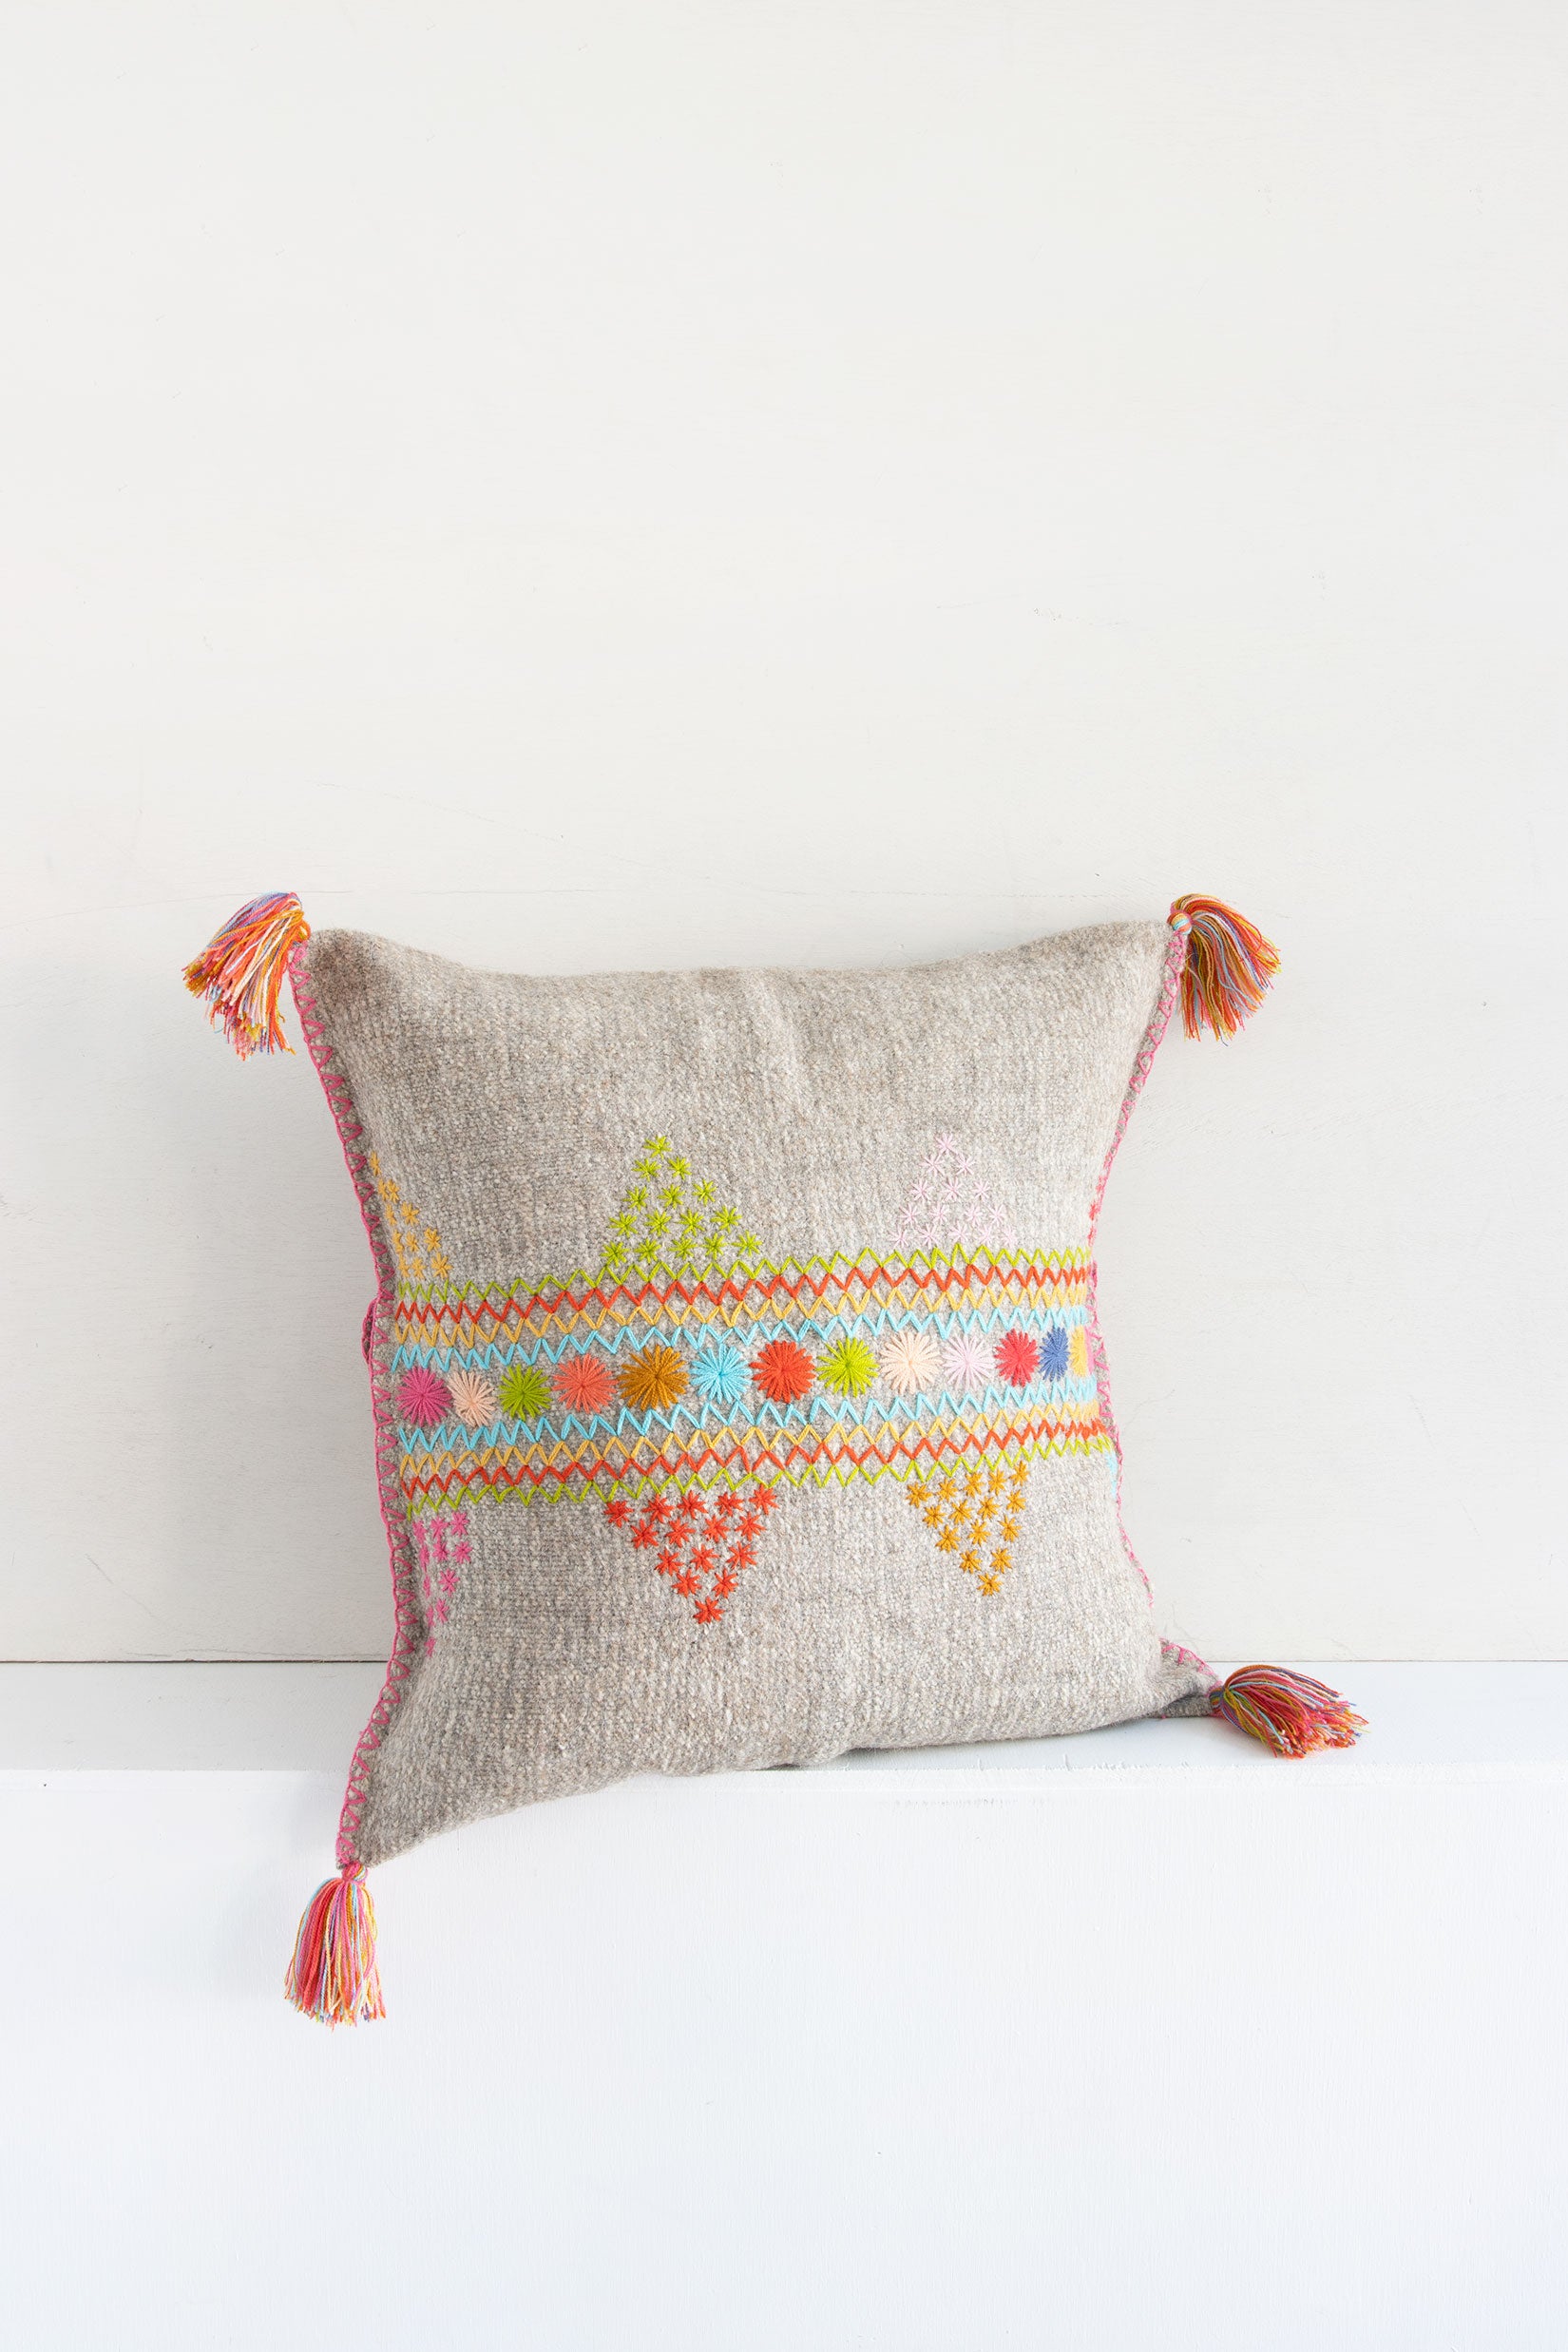 Square woven light grey wool throw pillow with multicolor star and zig-zag embroidery and tassels at each corner